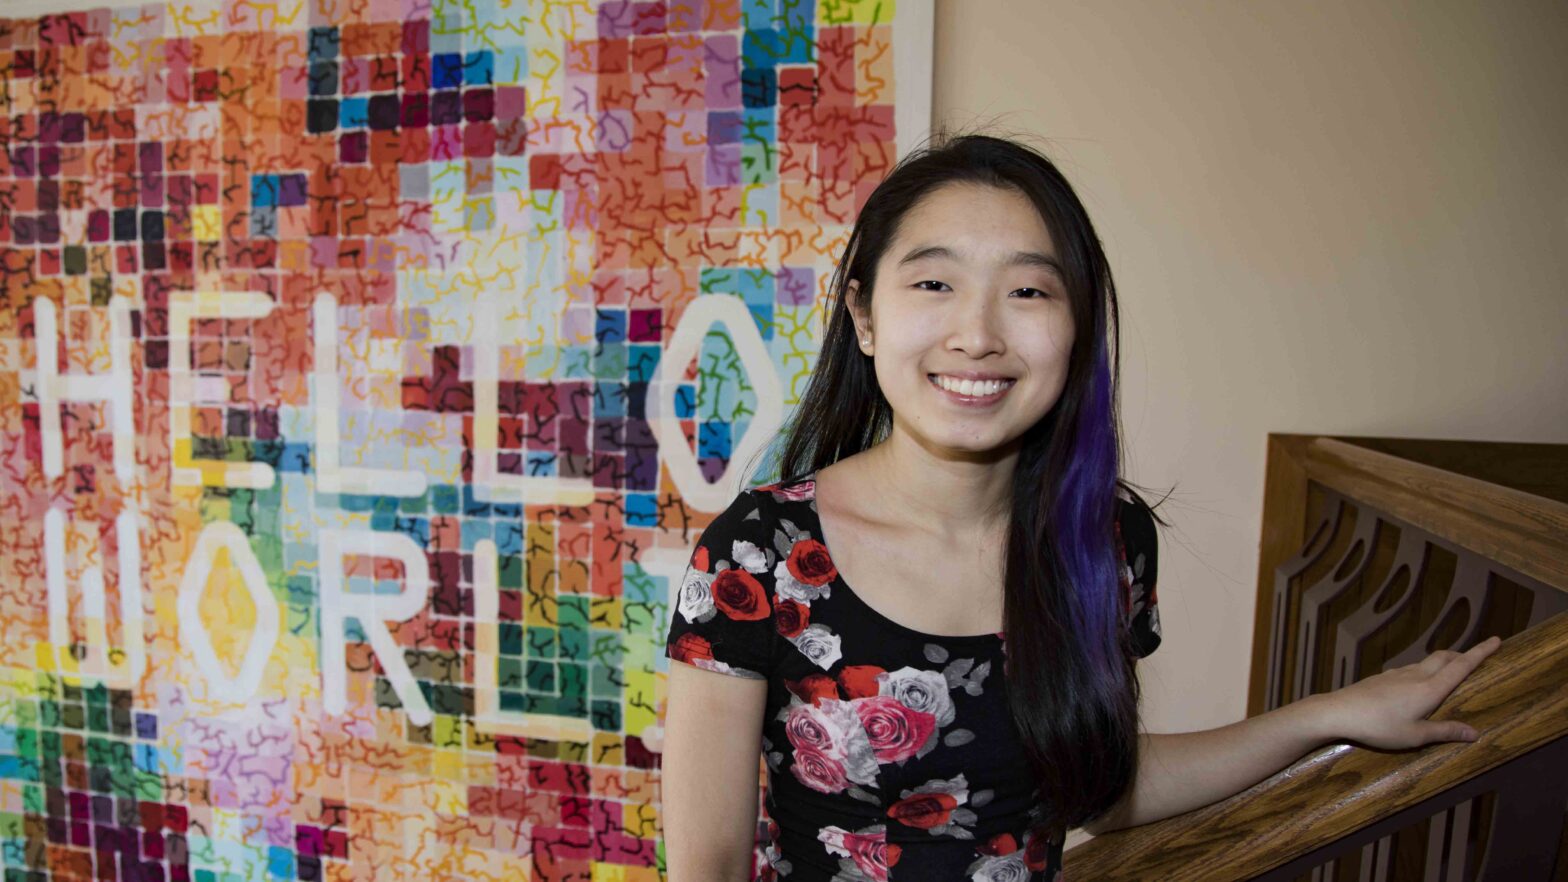 Portrait of Katherine Lim in front of "Hello World" mosaic